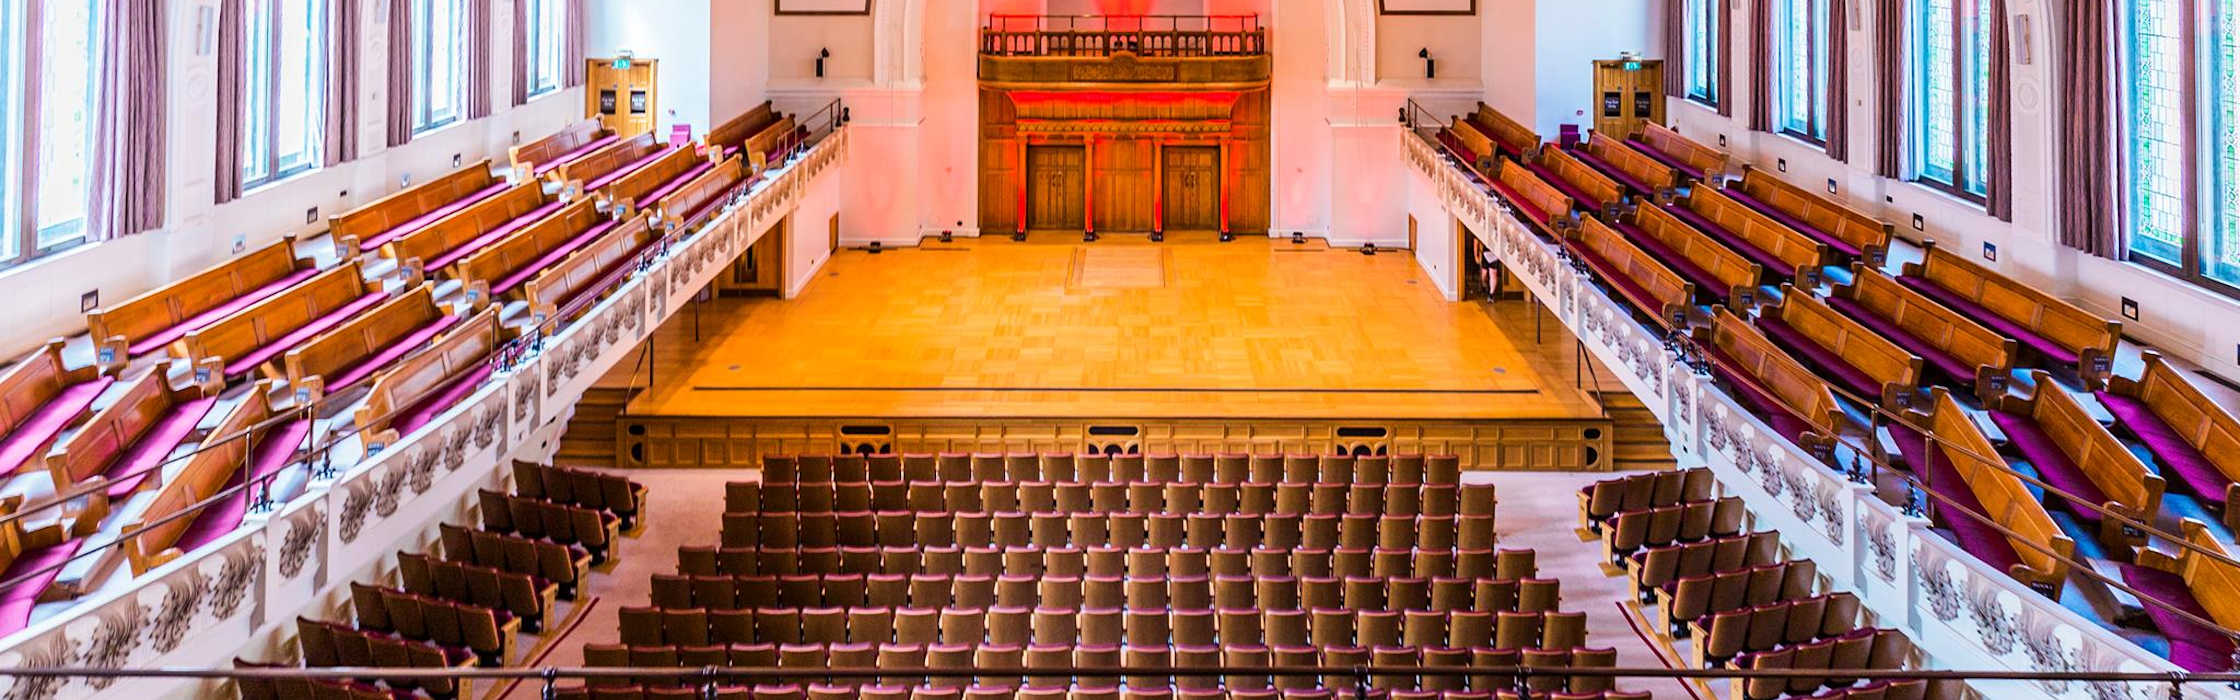 What's On at The Cadogan Hall, London